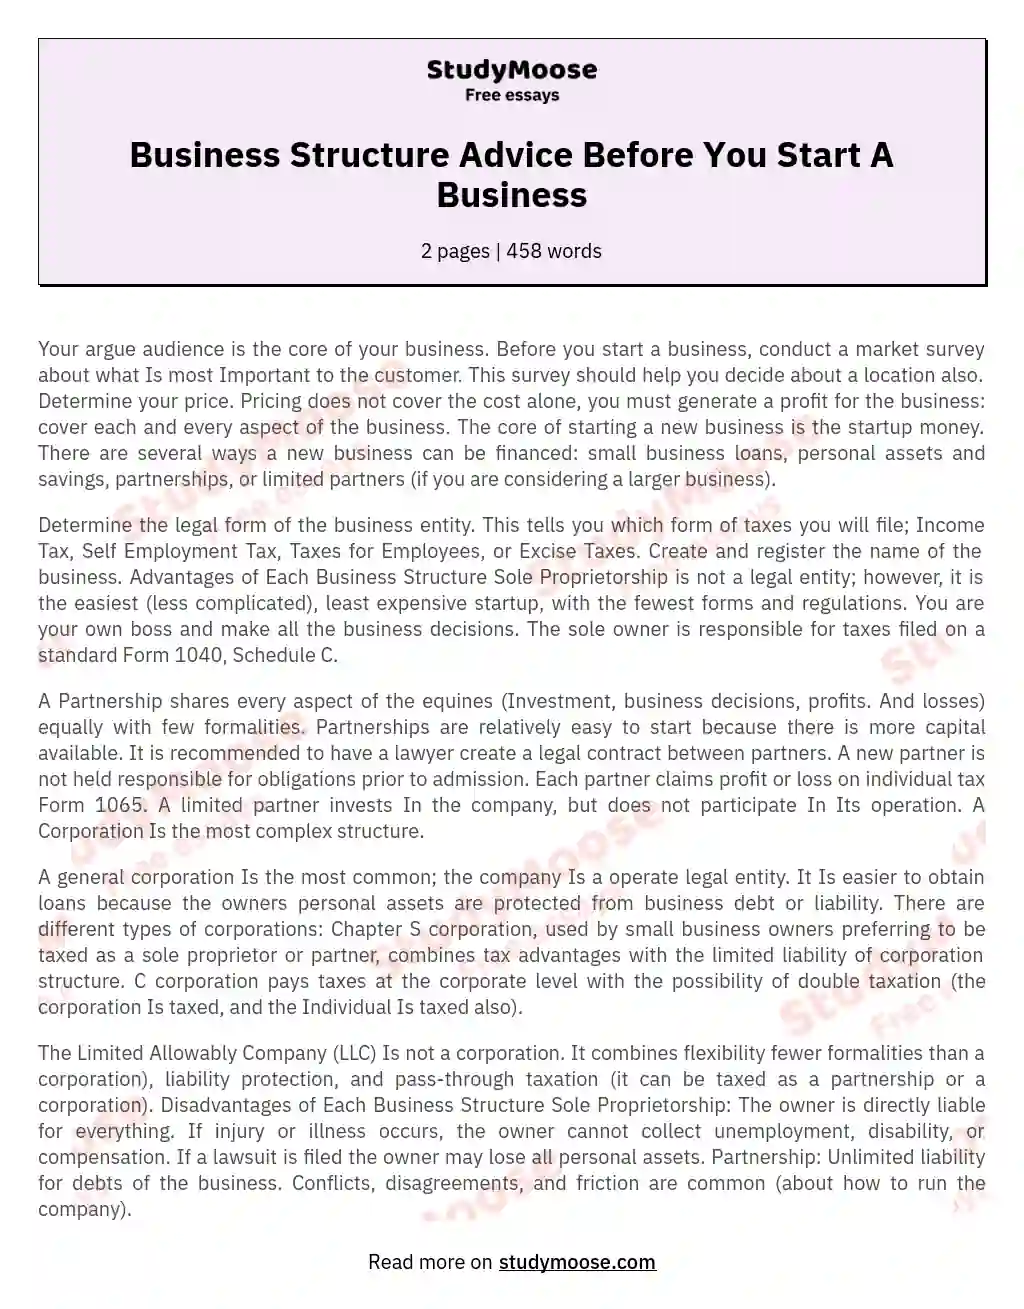 Business Structure Advice Before You Start A Business essay